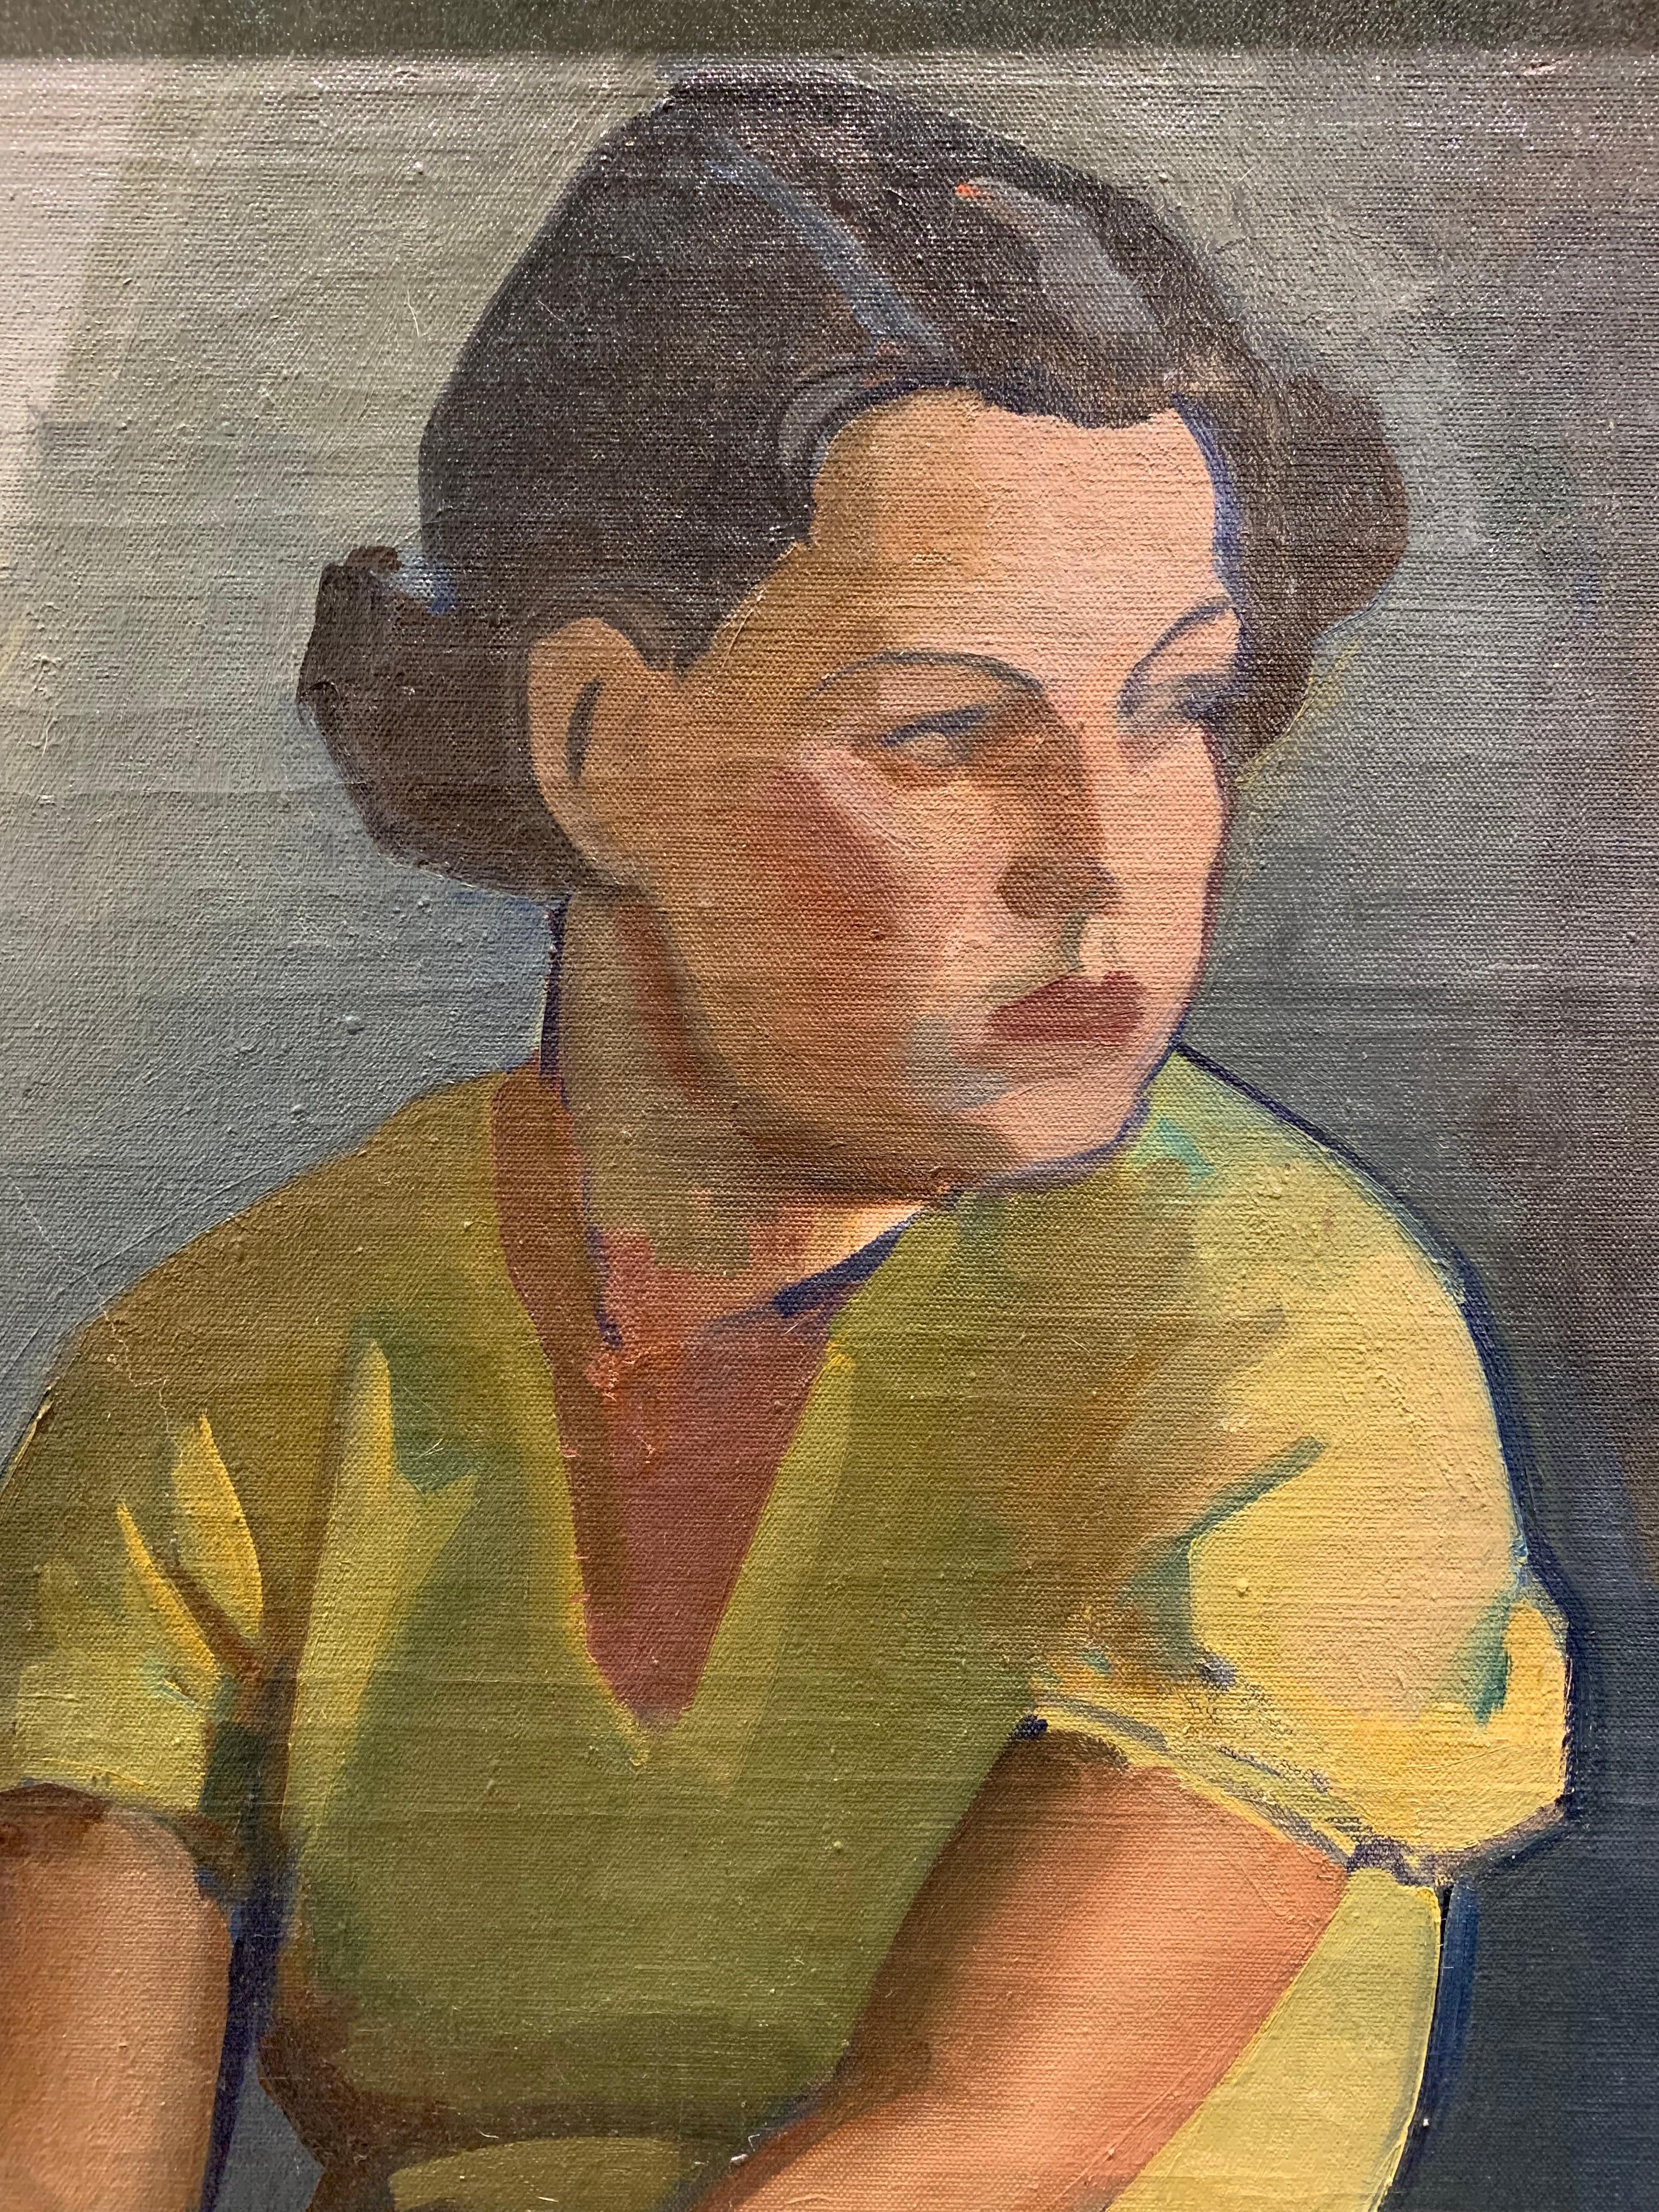 Paint 1930s Finnish 'Young Woman in a Yellow Dress' Oil on Canvas Artist Llmari Aalto For Sale